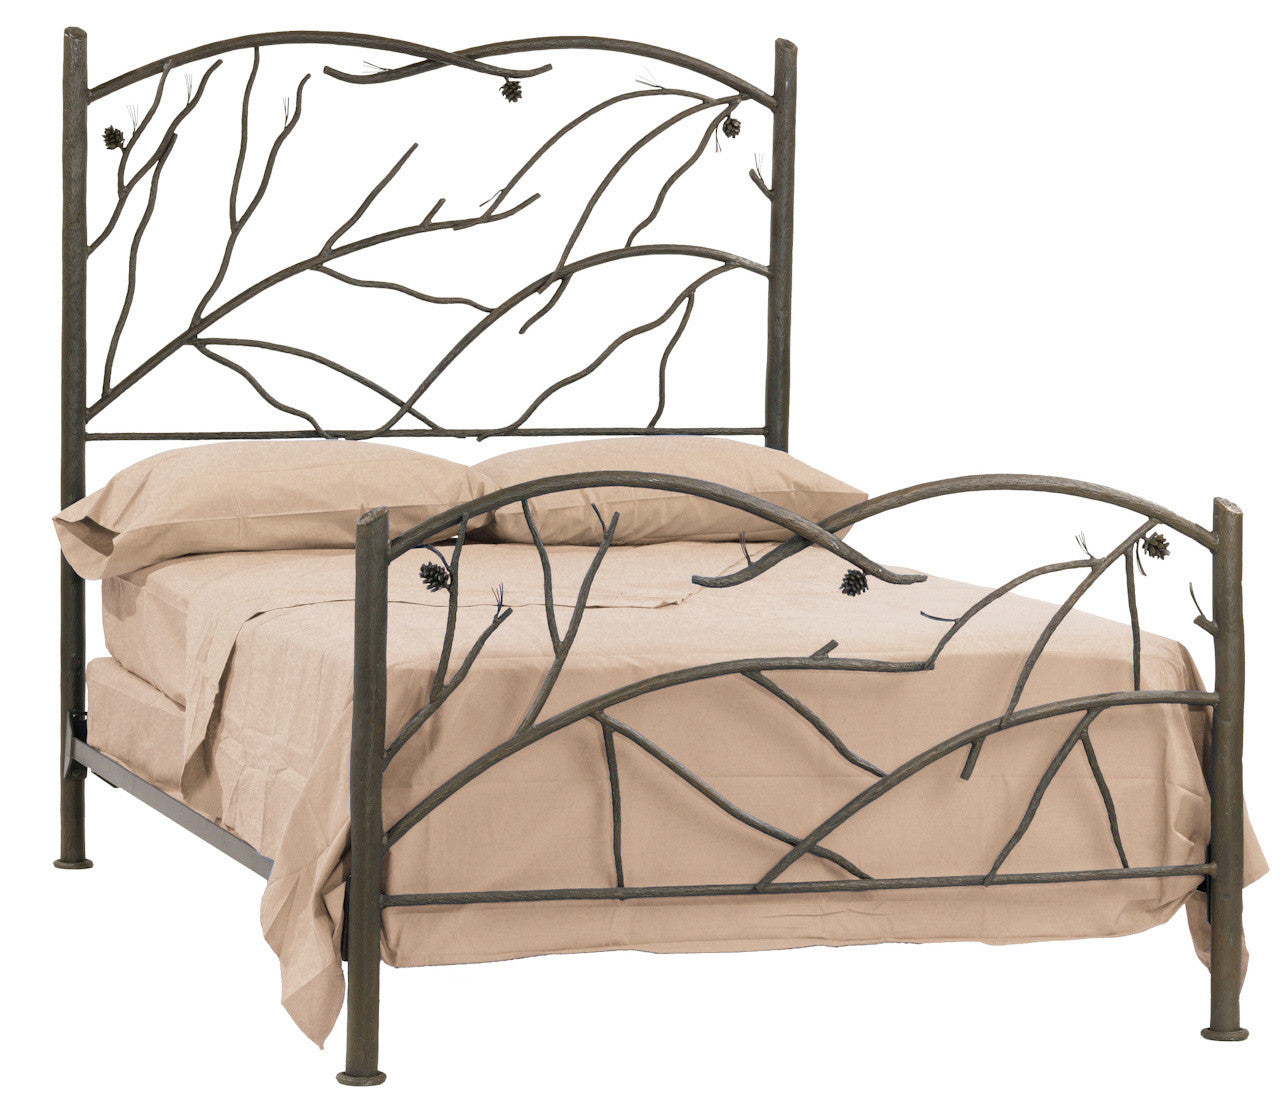 Stone County Ironworks 904-095 Pine King Bed (natural Bark)